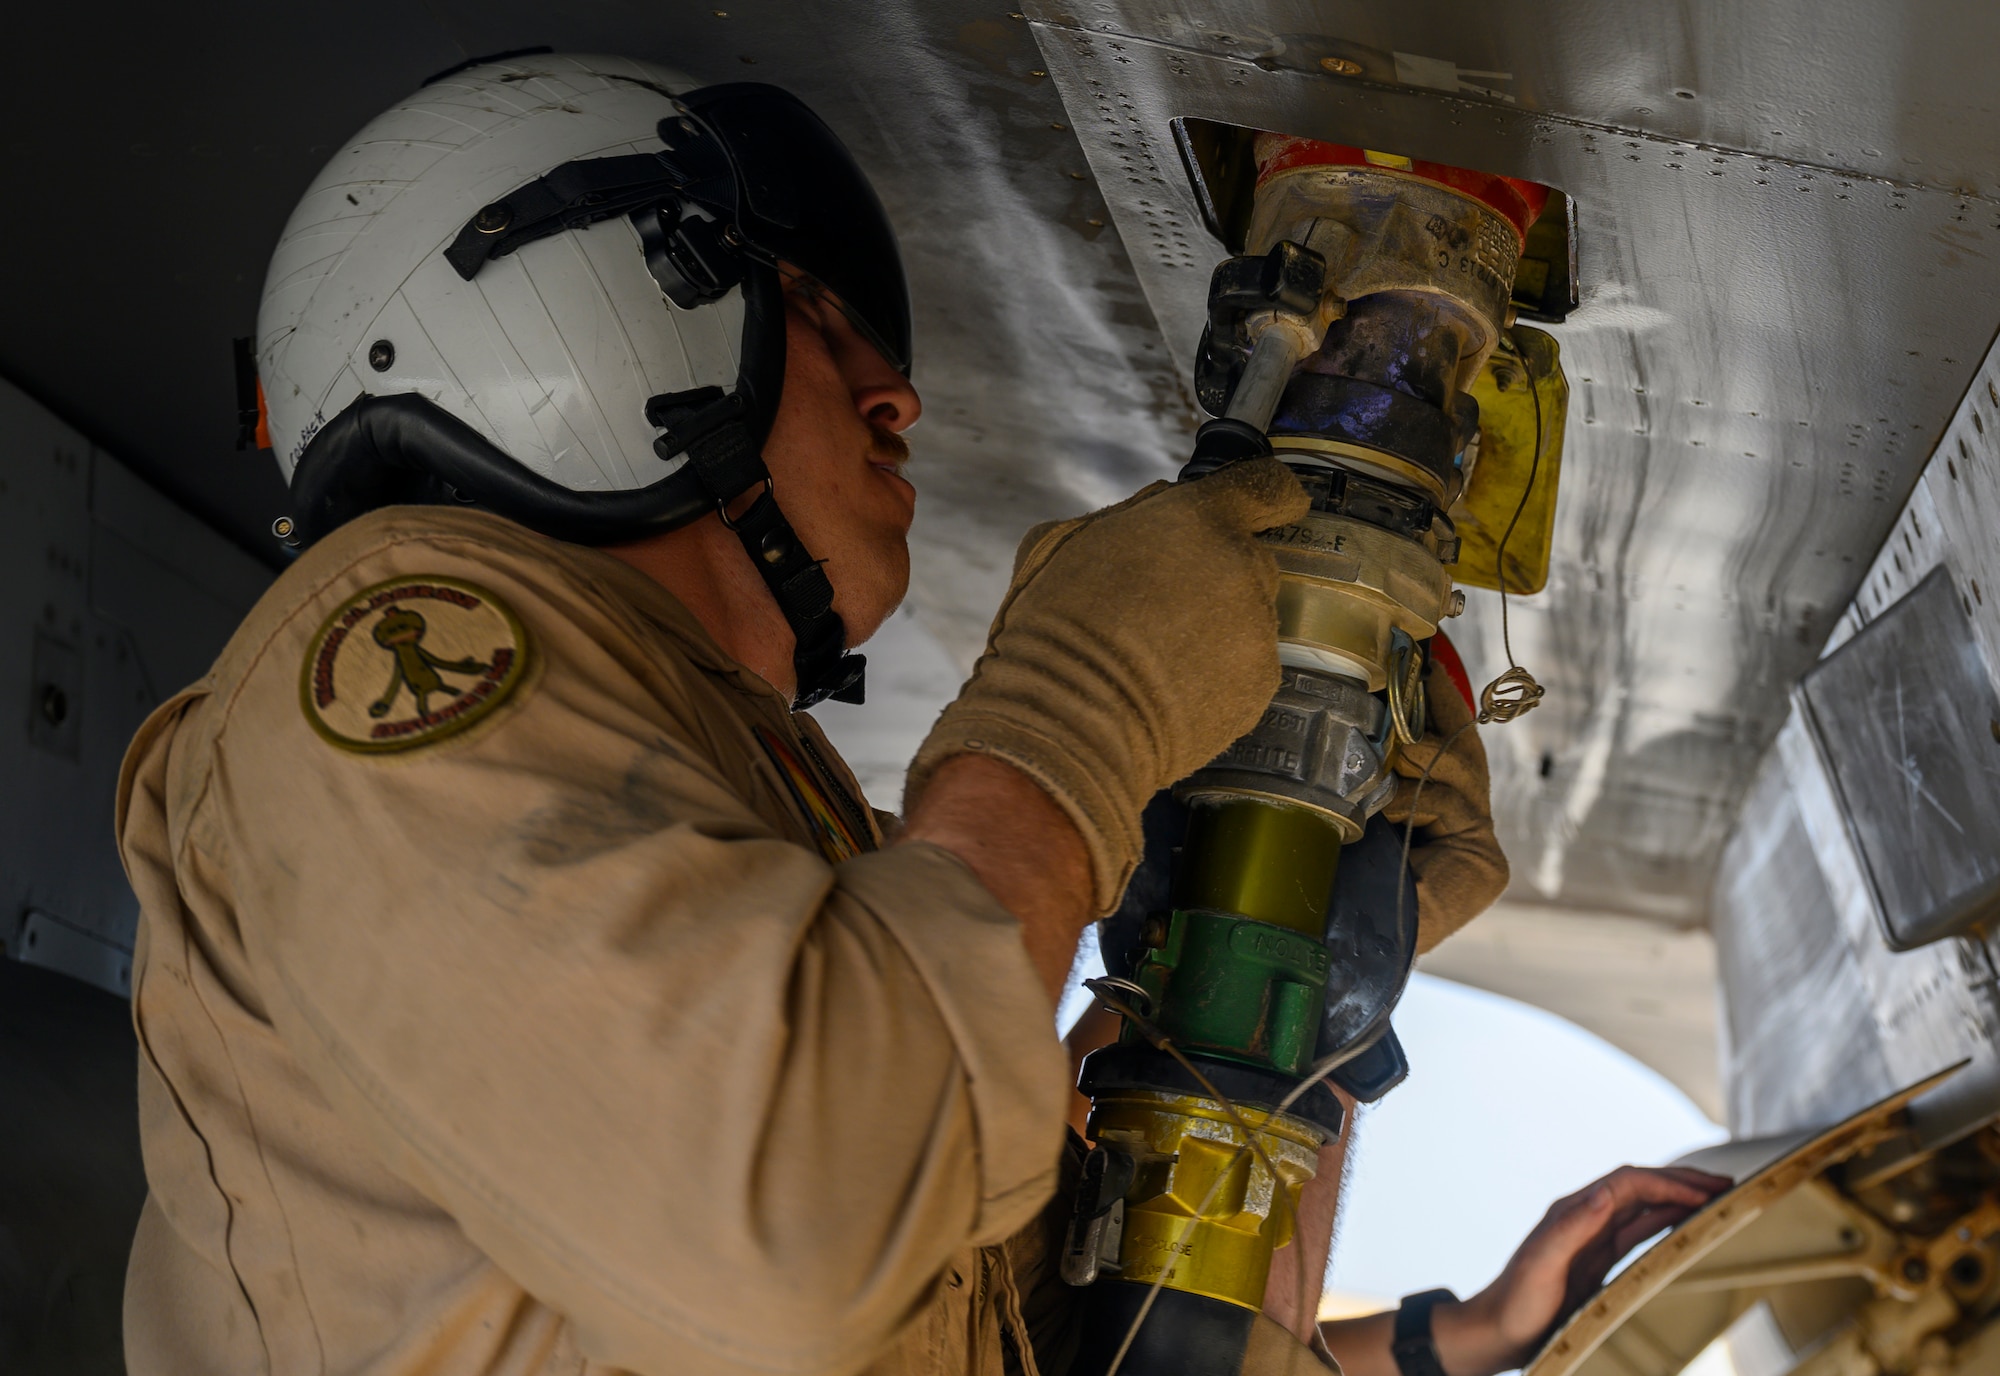 A U.S. Marine with Marine Aerial Refueler Transport Squadron 352, assigned to Special Purpose Marine Air-Ground Task Force – Crisis Response – Central Command, attaches a fuel hose to “hot pit” refuel a U.S. Air Force F-16 Fighting Falcon during a counter unmanned aerial system integration mission with joint and Royal Saudi aircraft at a forward location in the Kingdom of Saudi Arabia, June 30, 2021. U.S. Air Forces Central aircraft regularly work with coalition and partner nations to test their collective counter-UAS capabilities to ensure the security and stability of regional airspace. (U.S. Air Force photo by Senior Airman Samuel Earick)